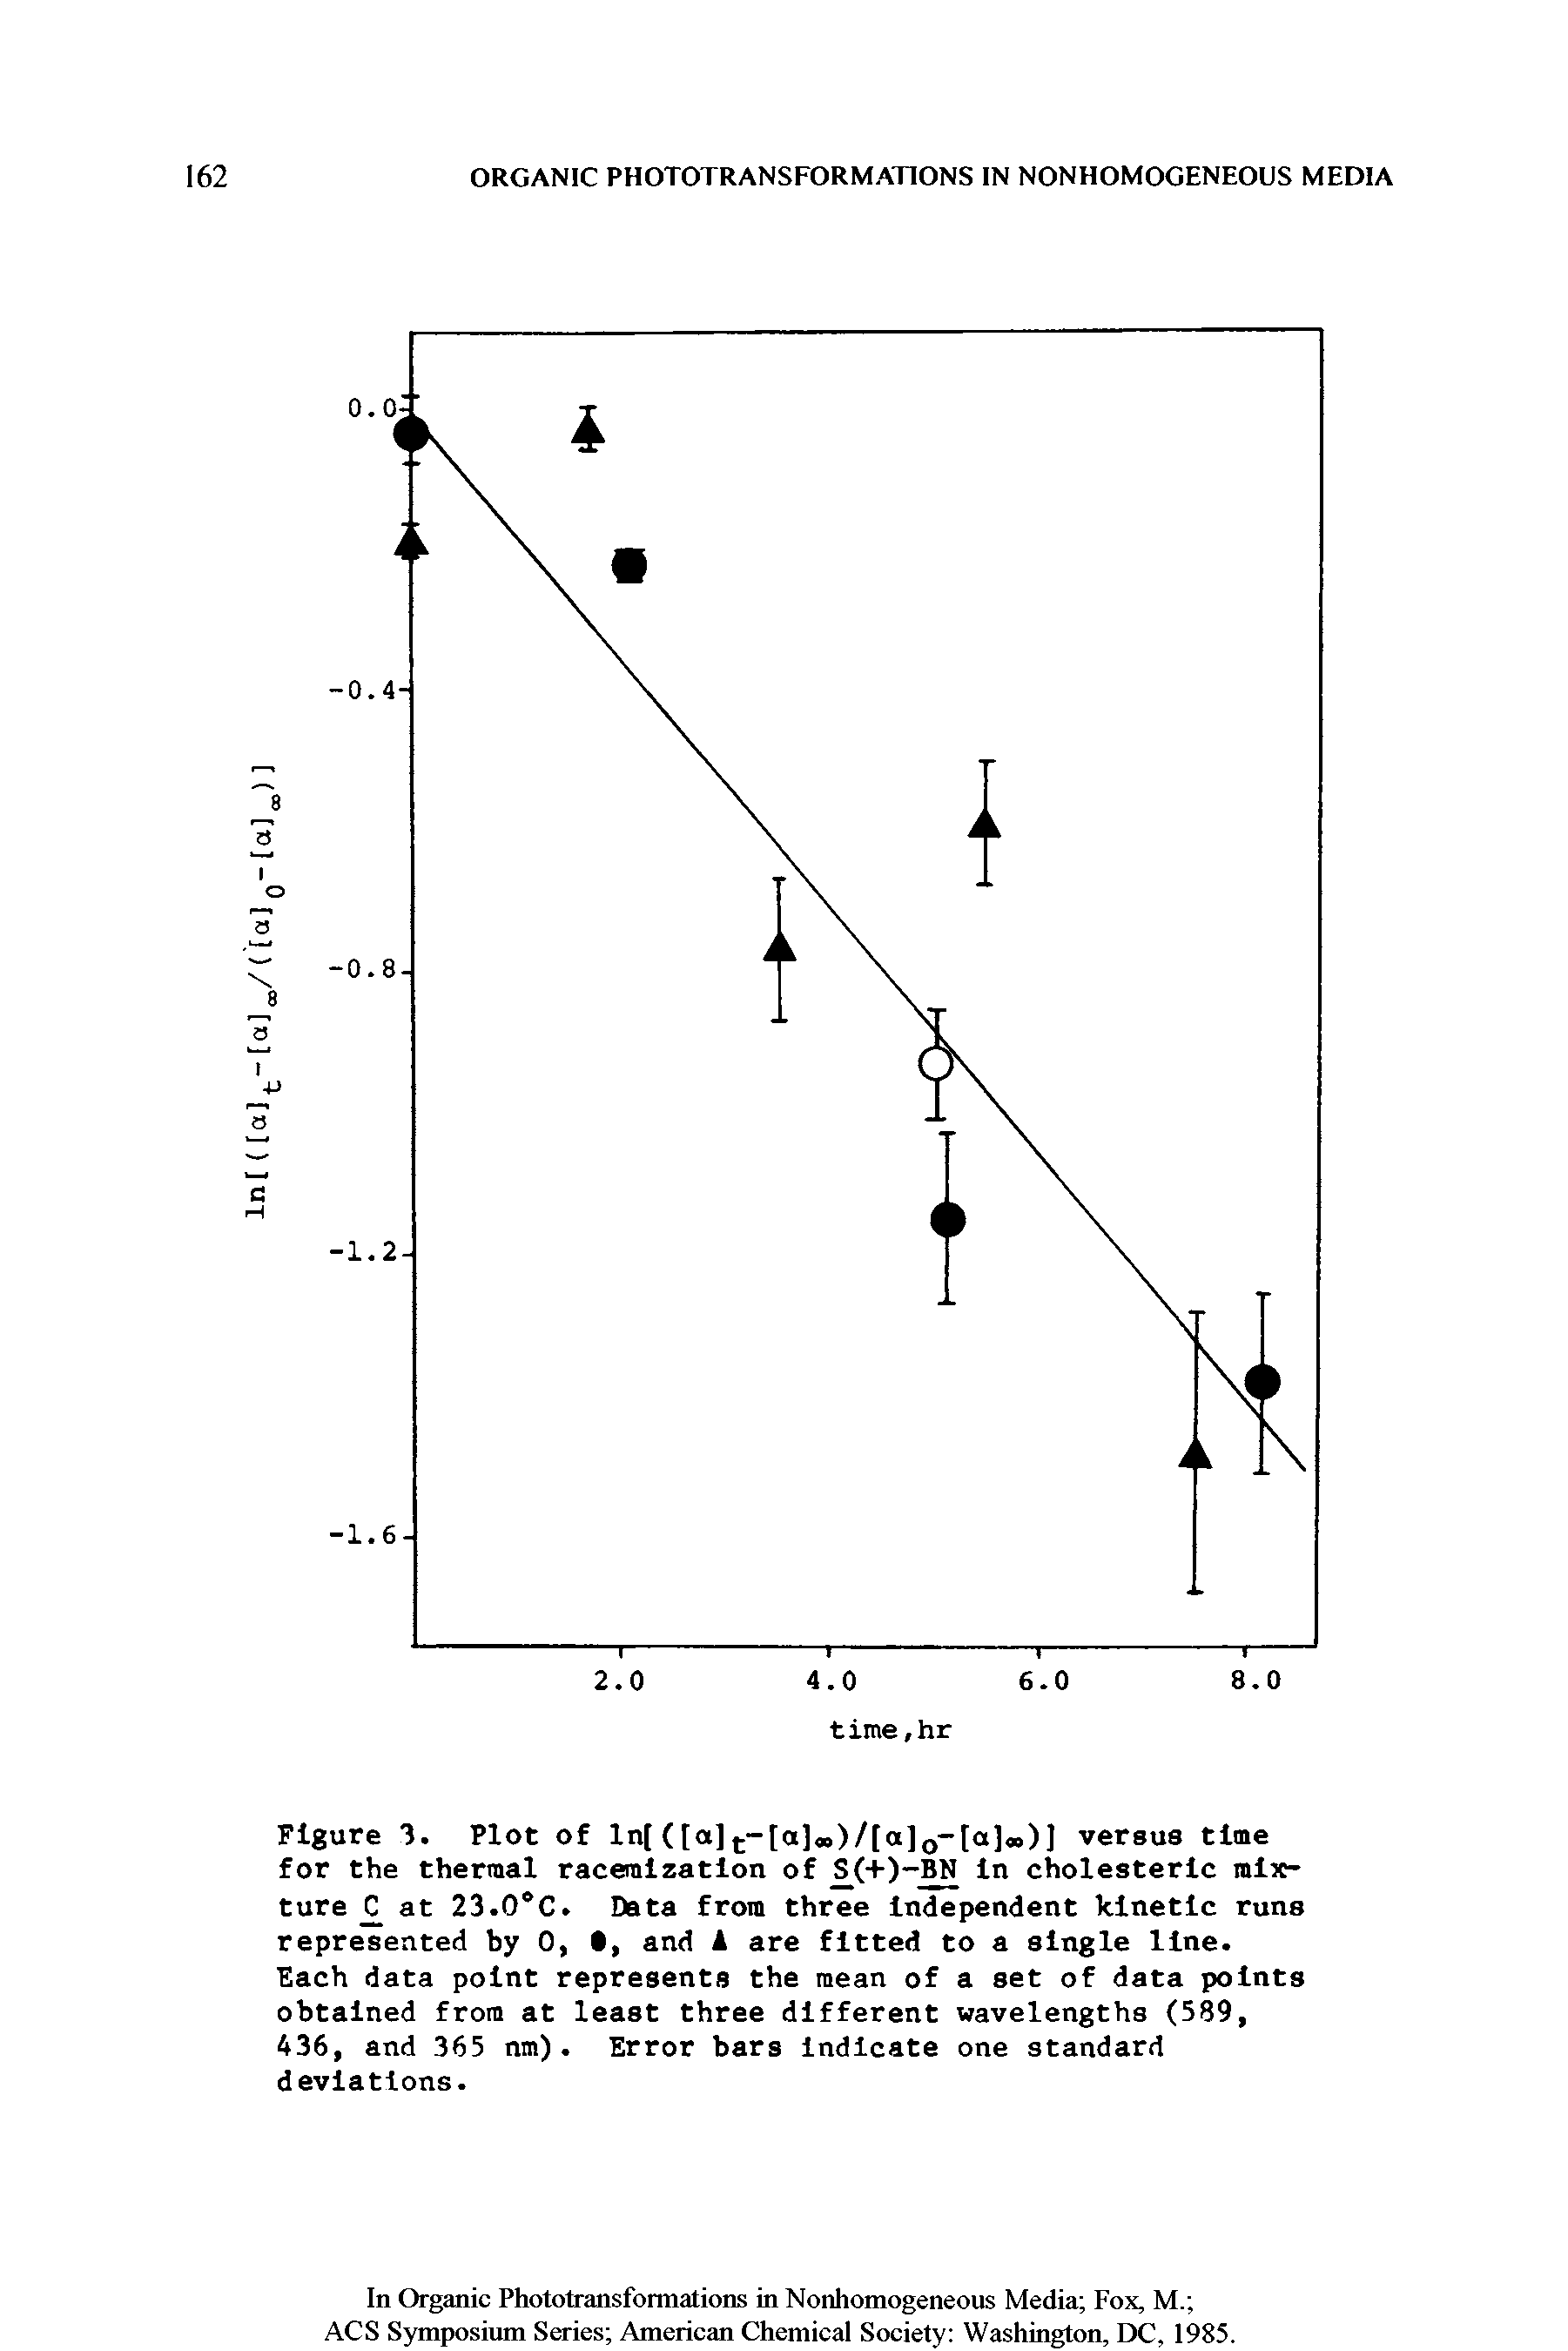 Figure 3. Plot of ln[ ([a]t-[a] )/[a]0-[a] >)] versus time for the thermal raceraization of S(+)-BN in cholesteric mixture C at 23.0°C. Data from three independent kinetic runs represented by 0, , and A are fitted to a single line.